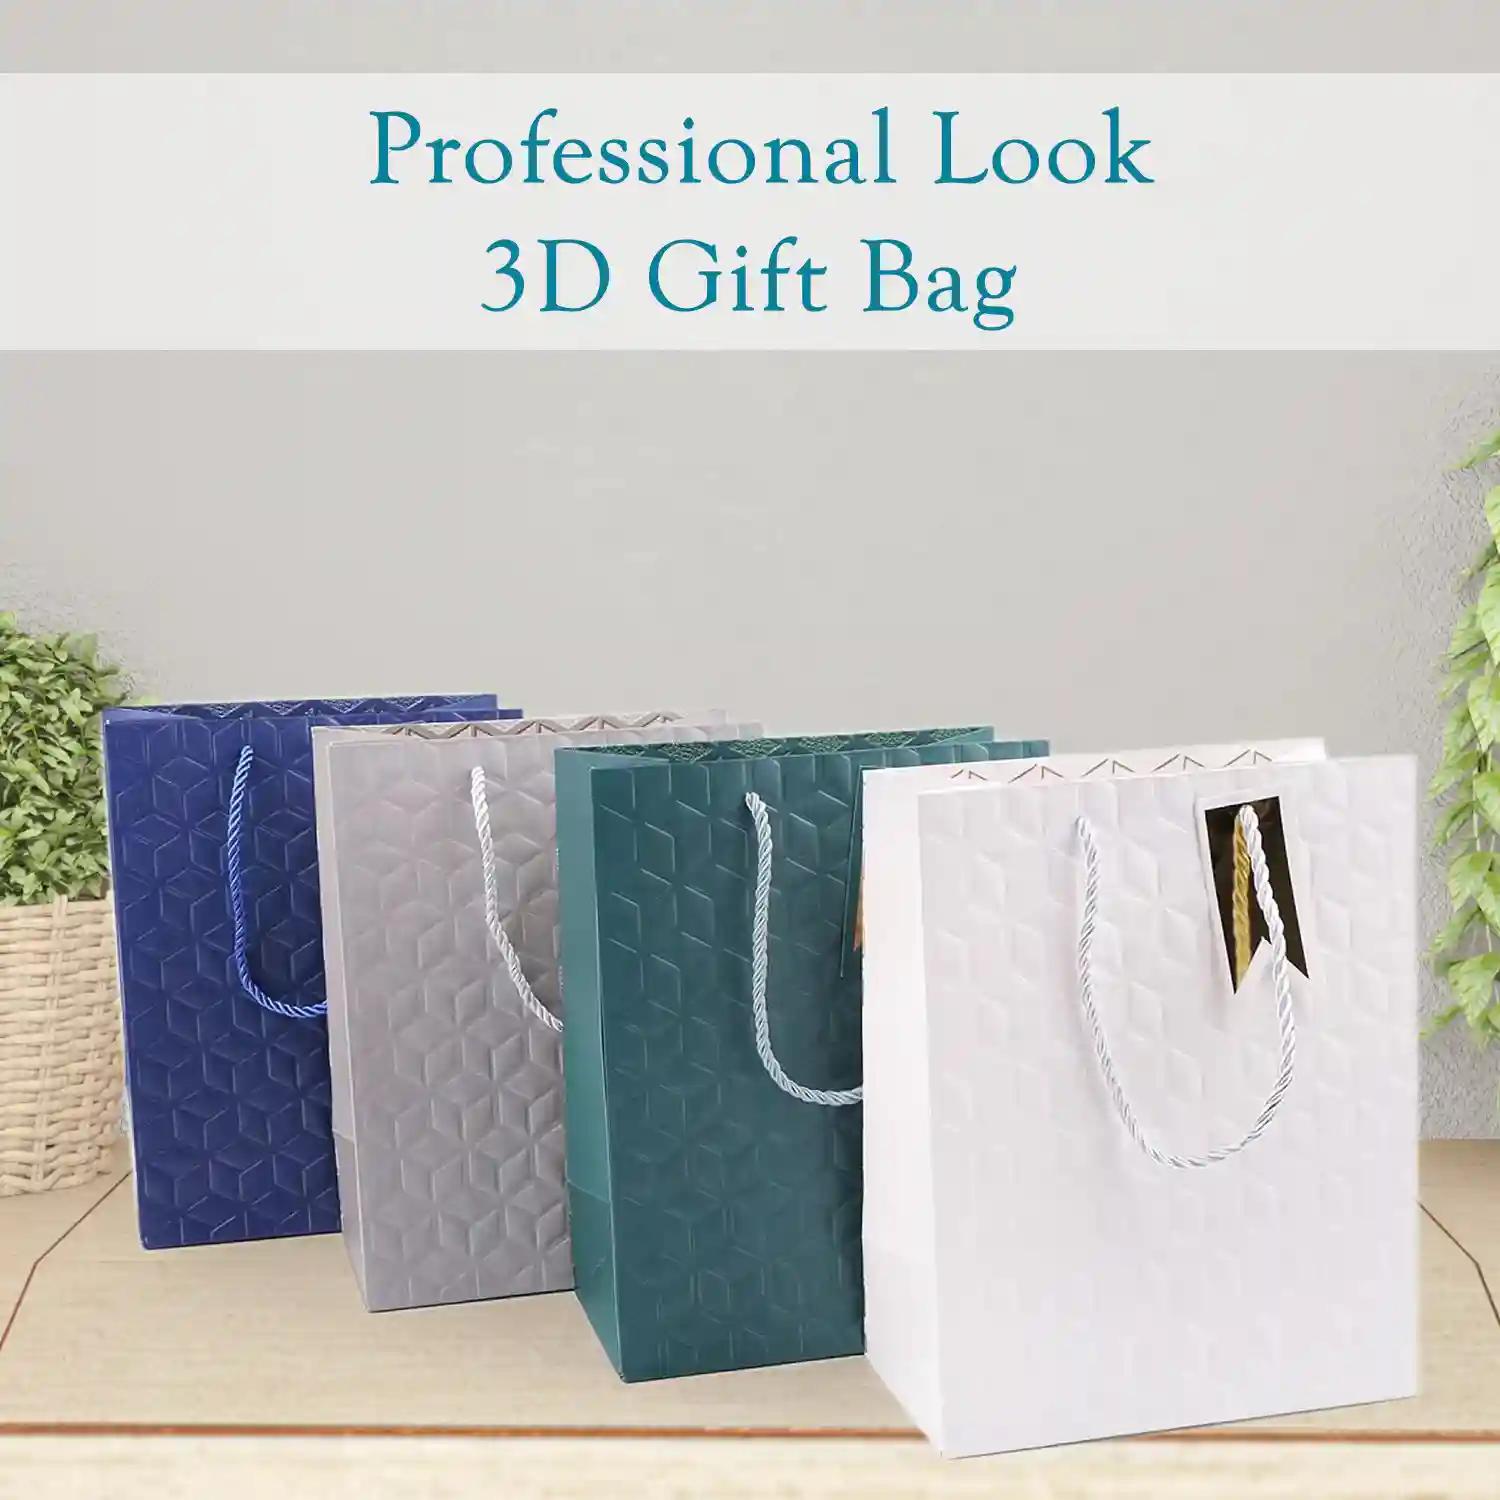 Simple Elegant Professional Look Gift Wrapping Bags 3D Simple Design Printed Tote Bags With Handle For Gifting People (Set Of 4)